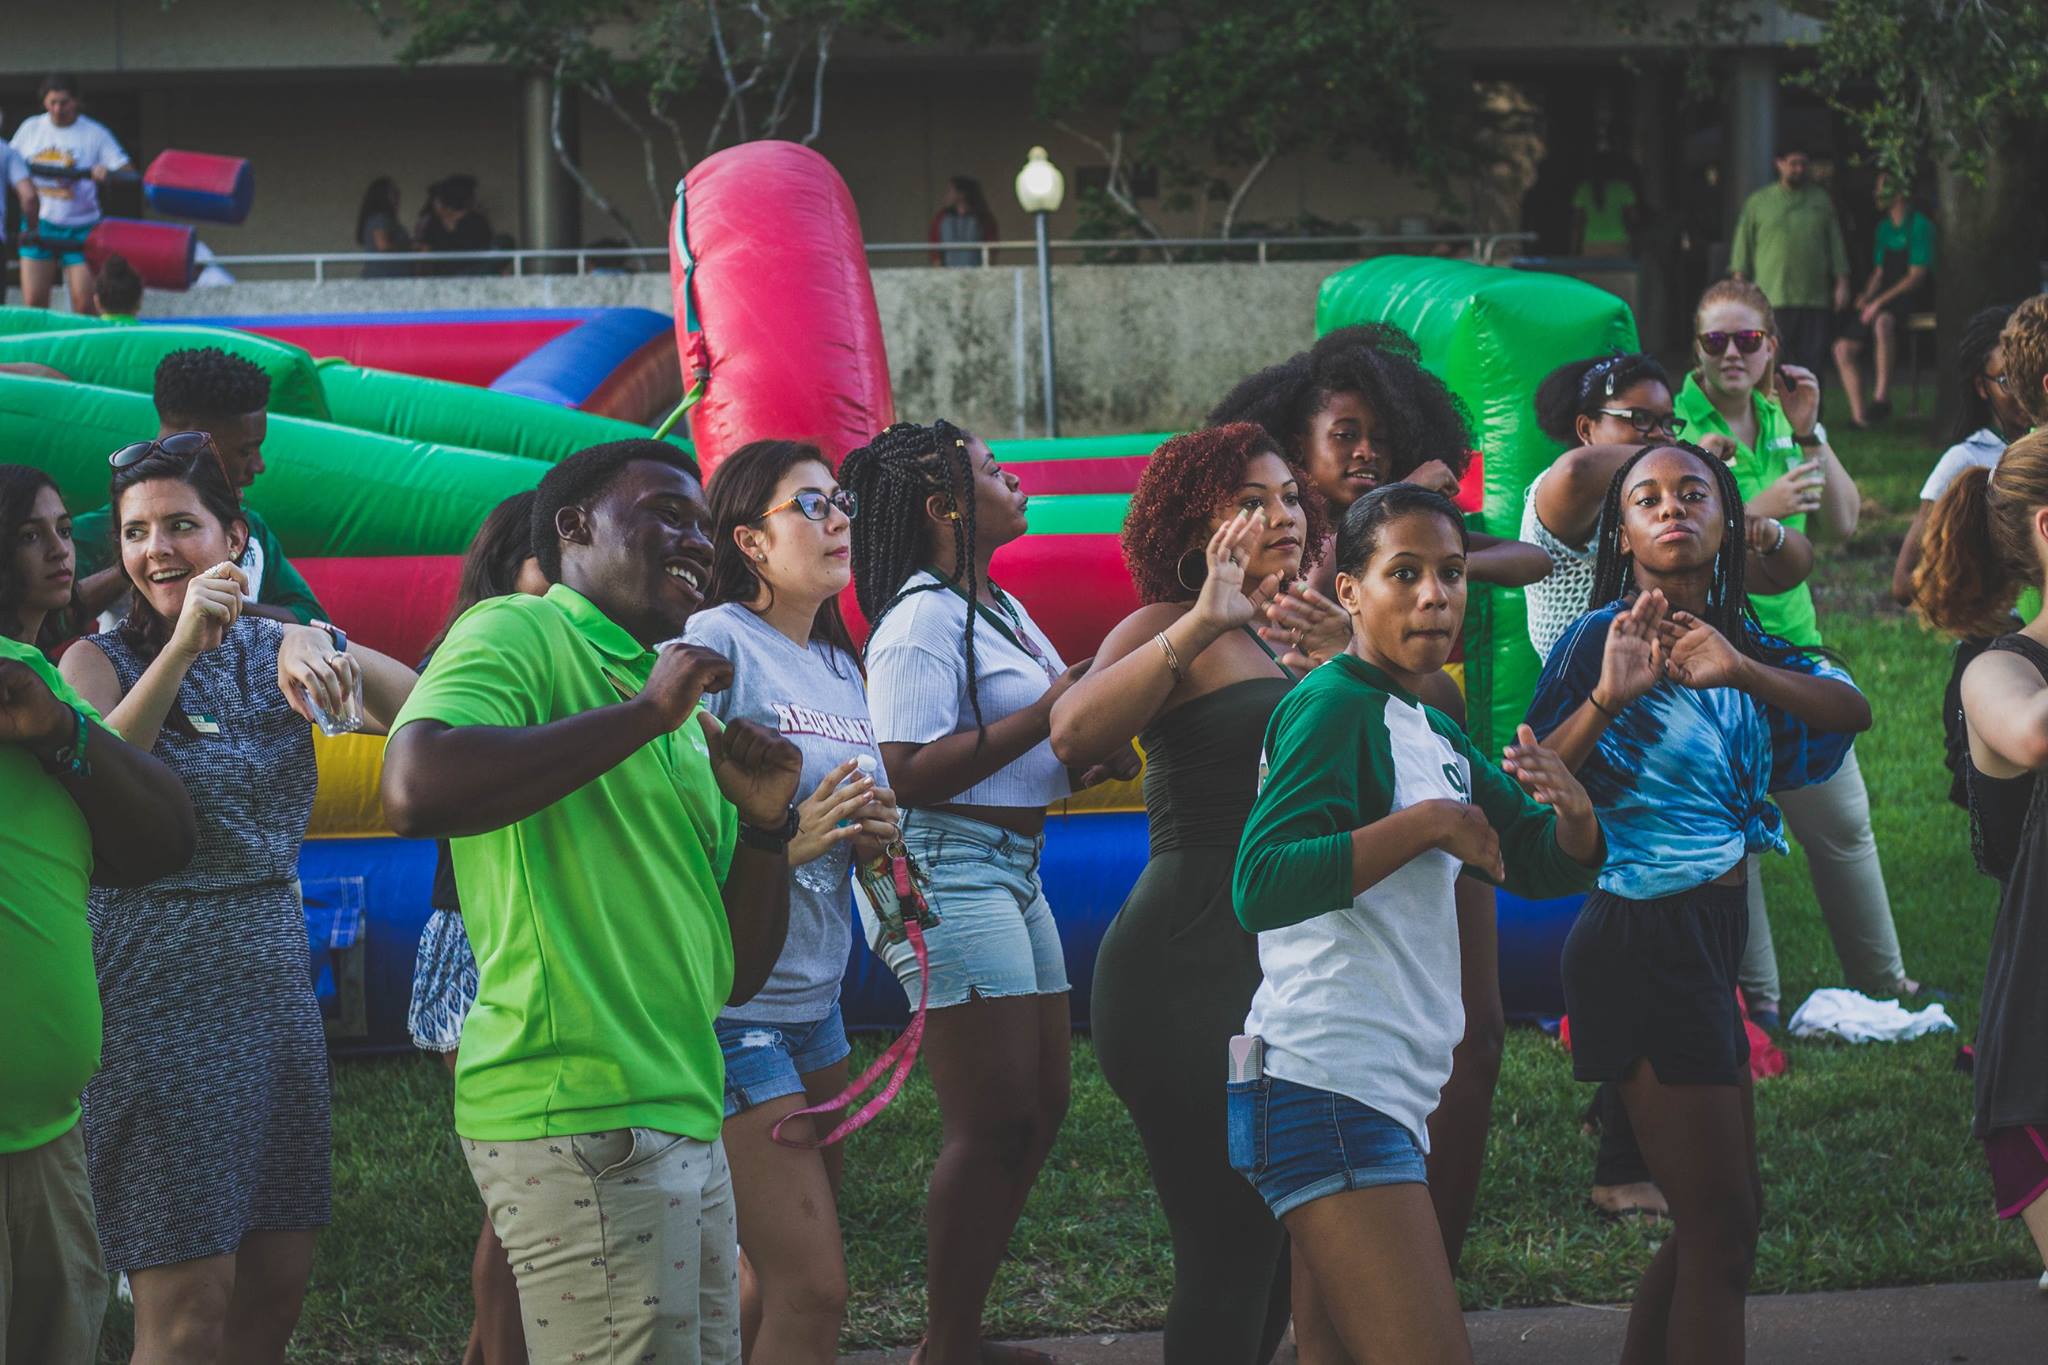 Students outdoors dancing in sync during USF week